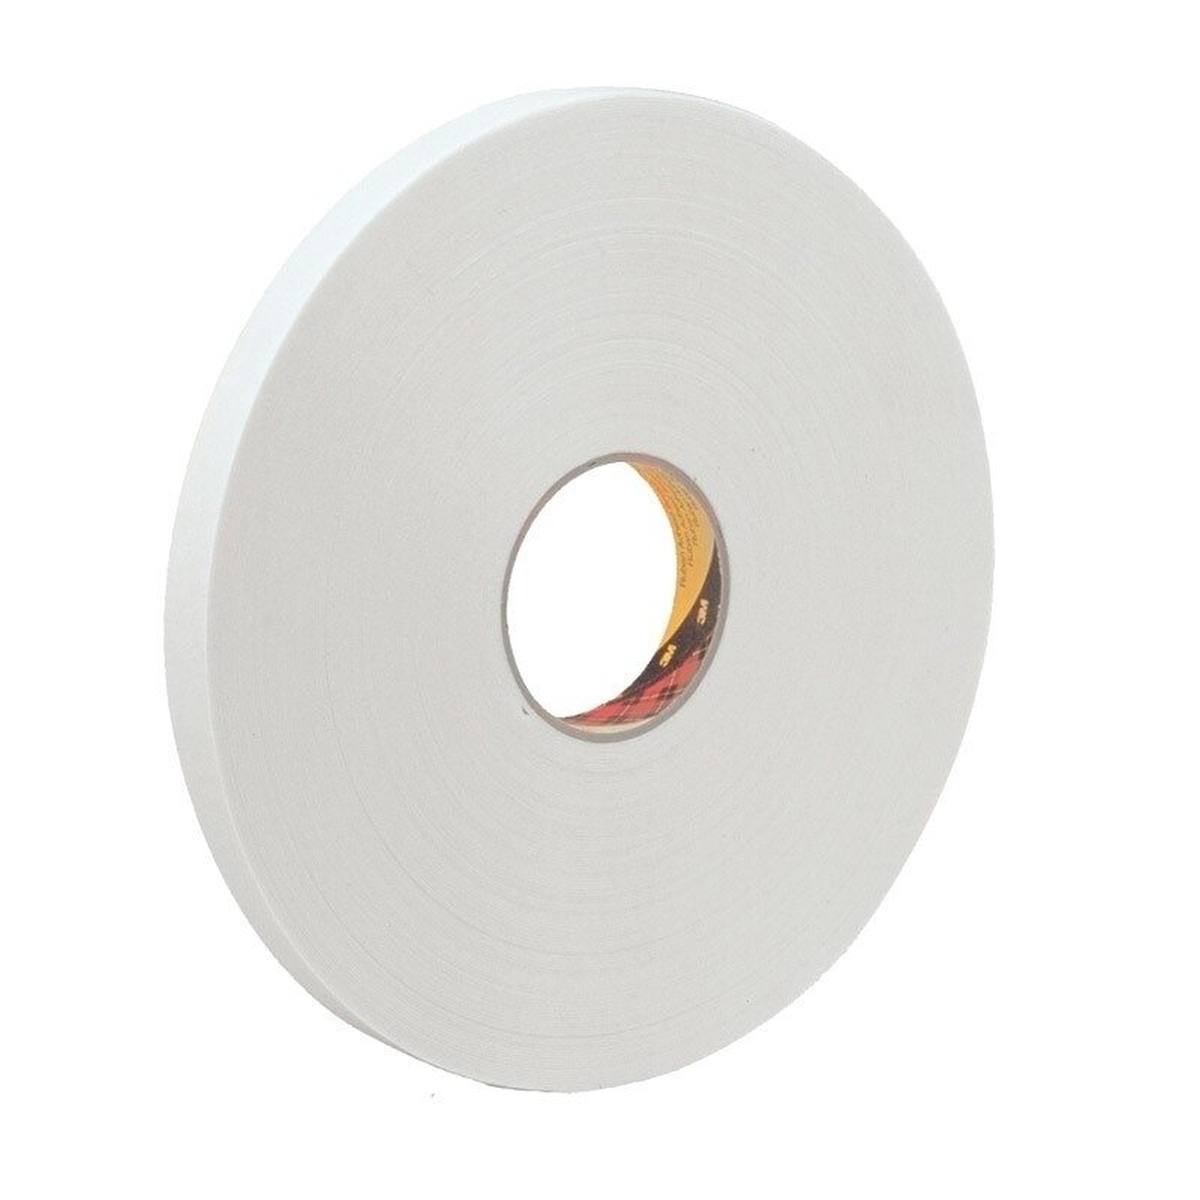 3M PE foam adhesive tape with acrylic adhesive 9539, white, 6 mm x 66 m, 0.8 mm